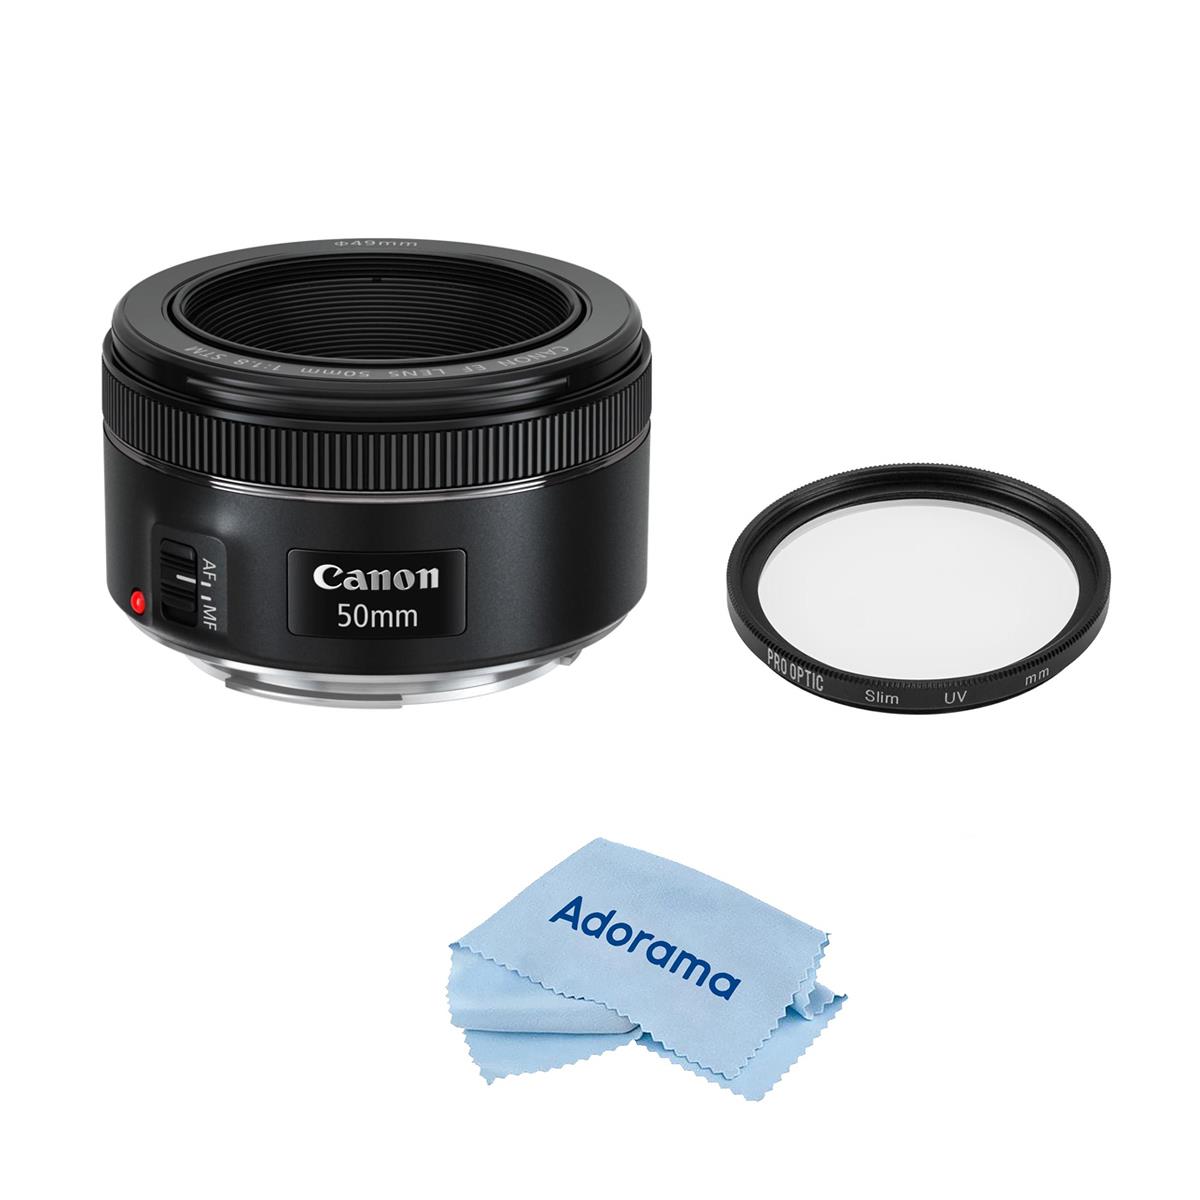 

Canon EF 50mm f/1.8 STM Lens with Accessories Kit